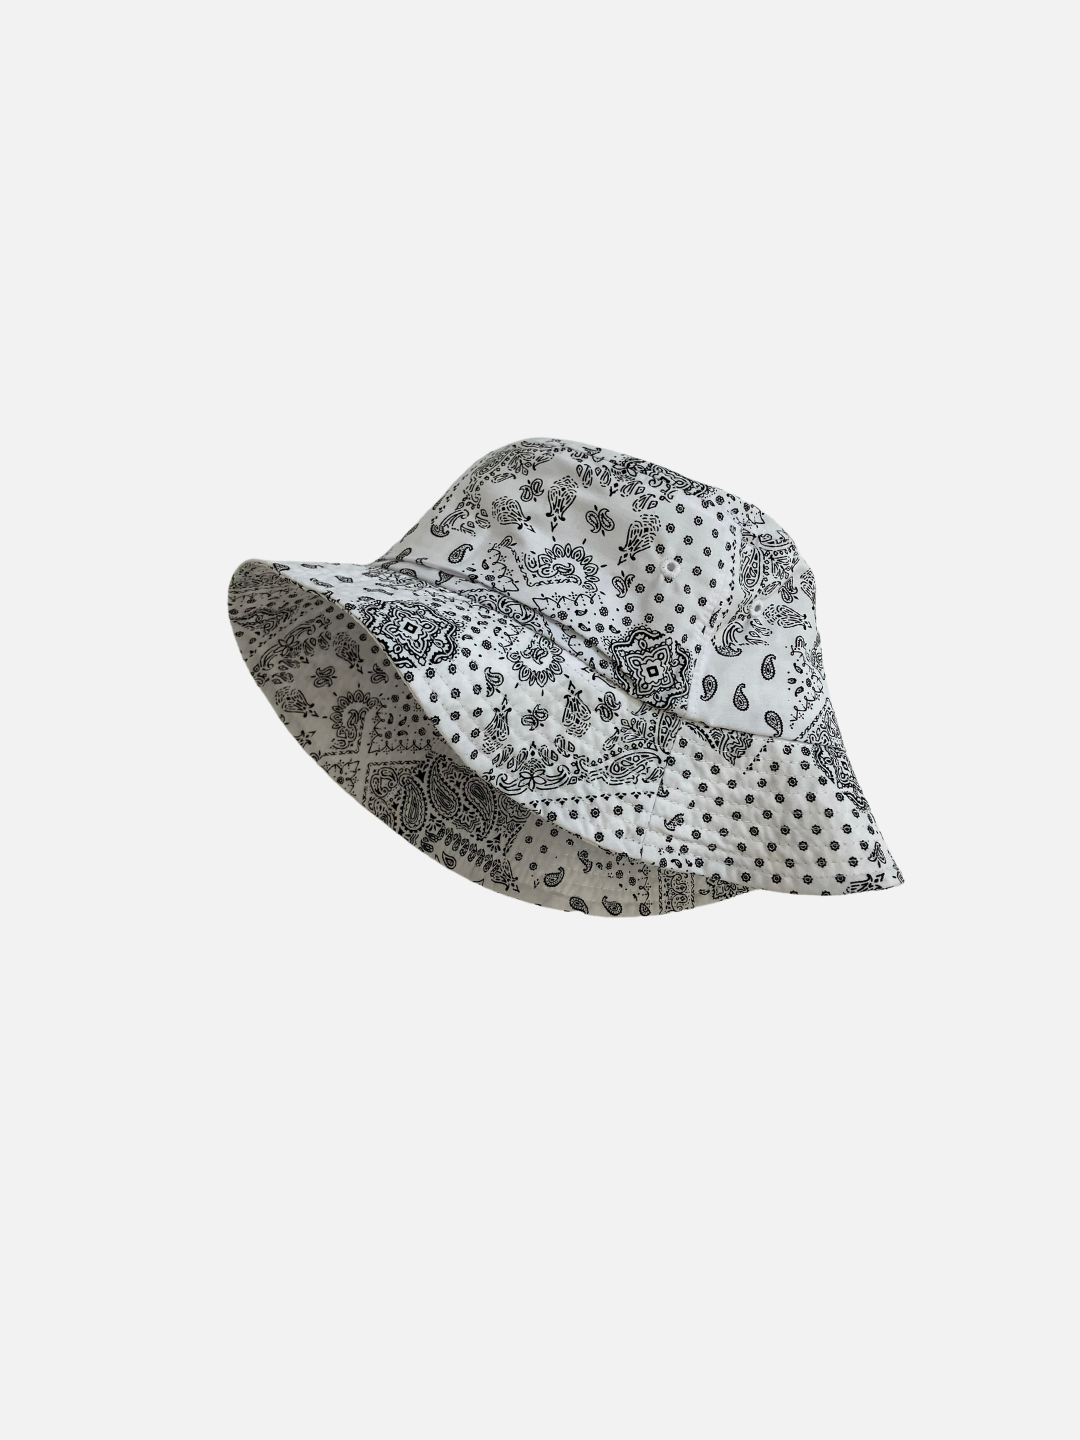 A white kids bucket hat with a bandana print shown from the side